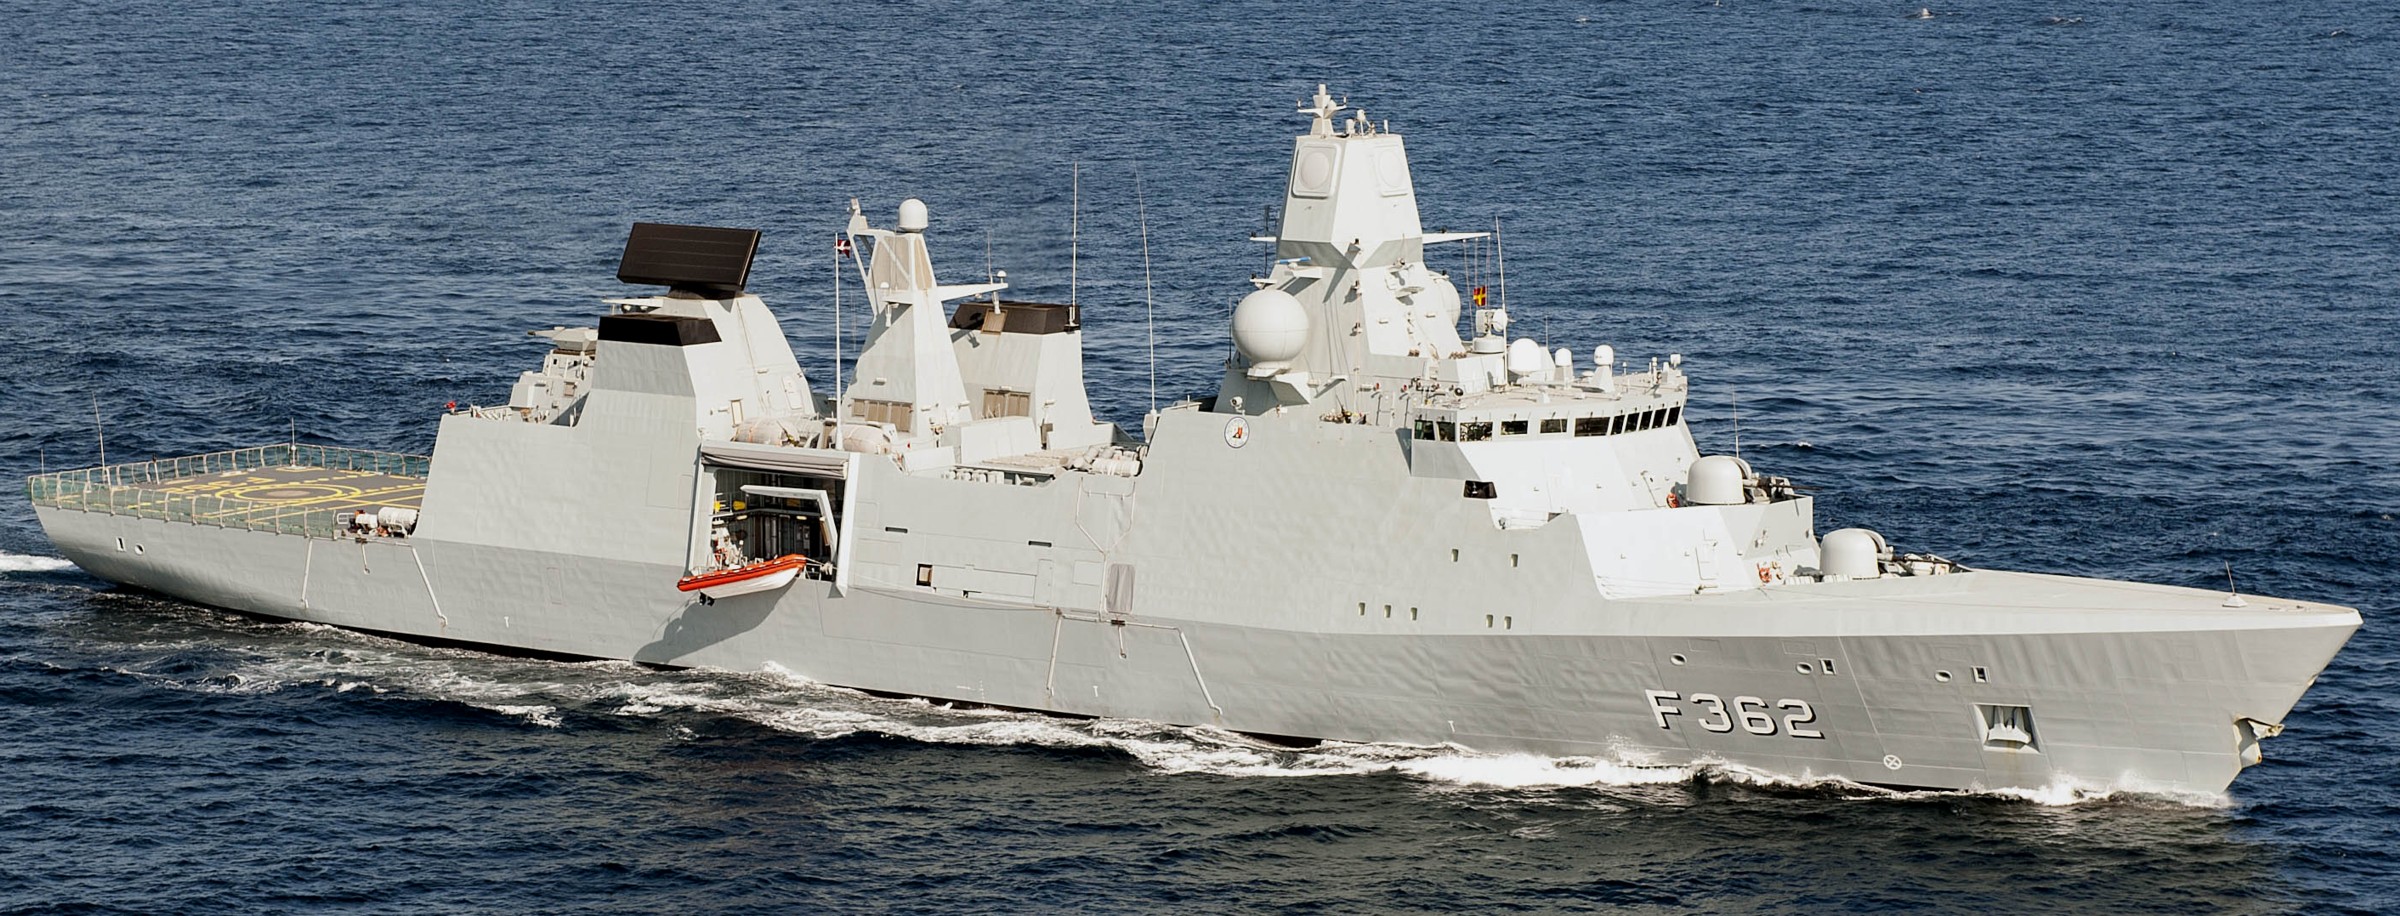 f-362 hdms peter willemoes iver huitfeldt class guided missile frigate ffg royal danish navy 11